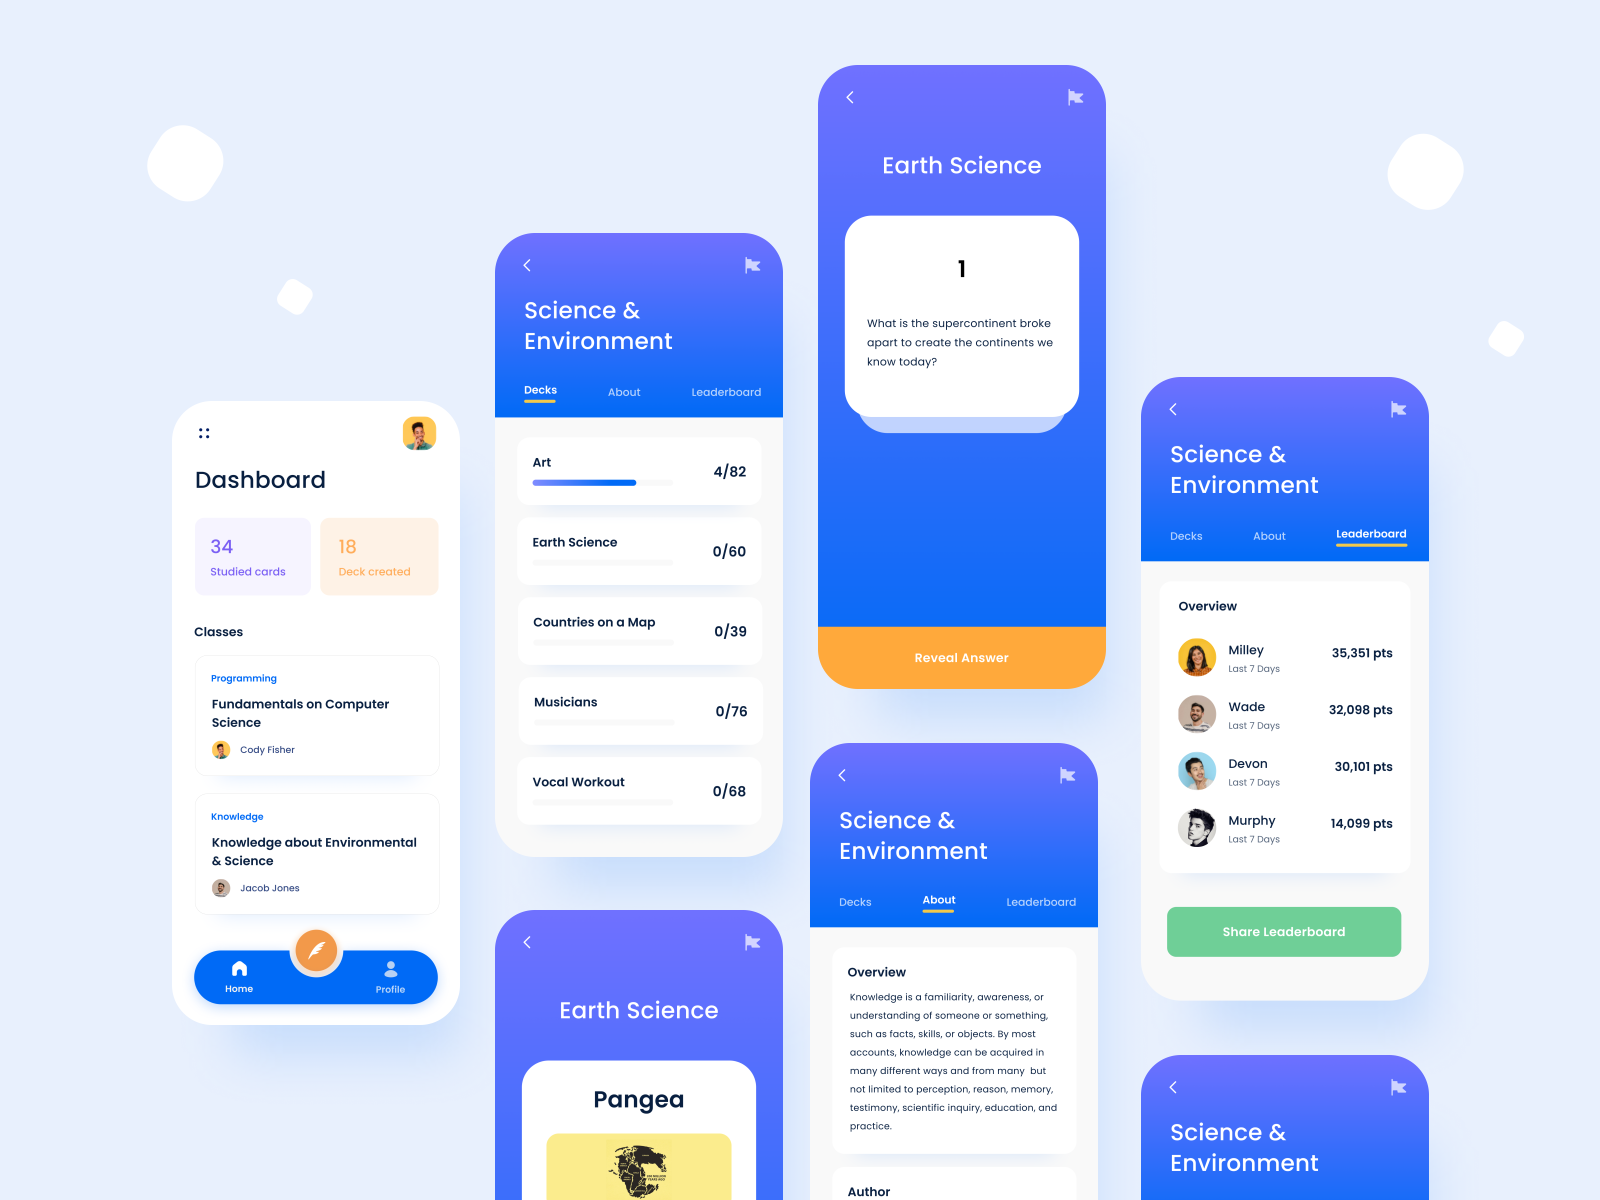 brainscape-flashcards-maker-app-by-spikey-sanju-for-f22-labs-on-dribbble